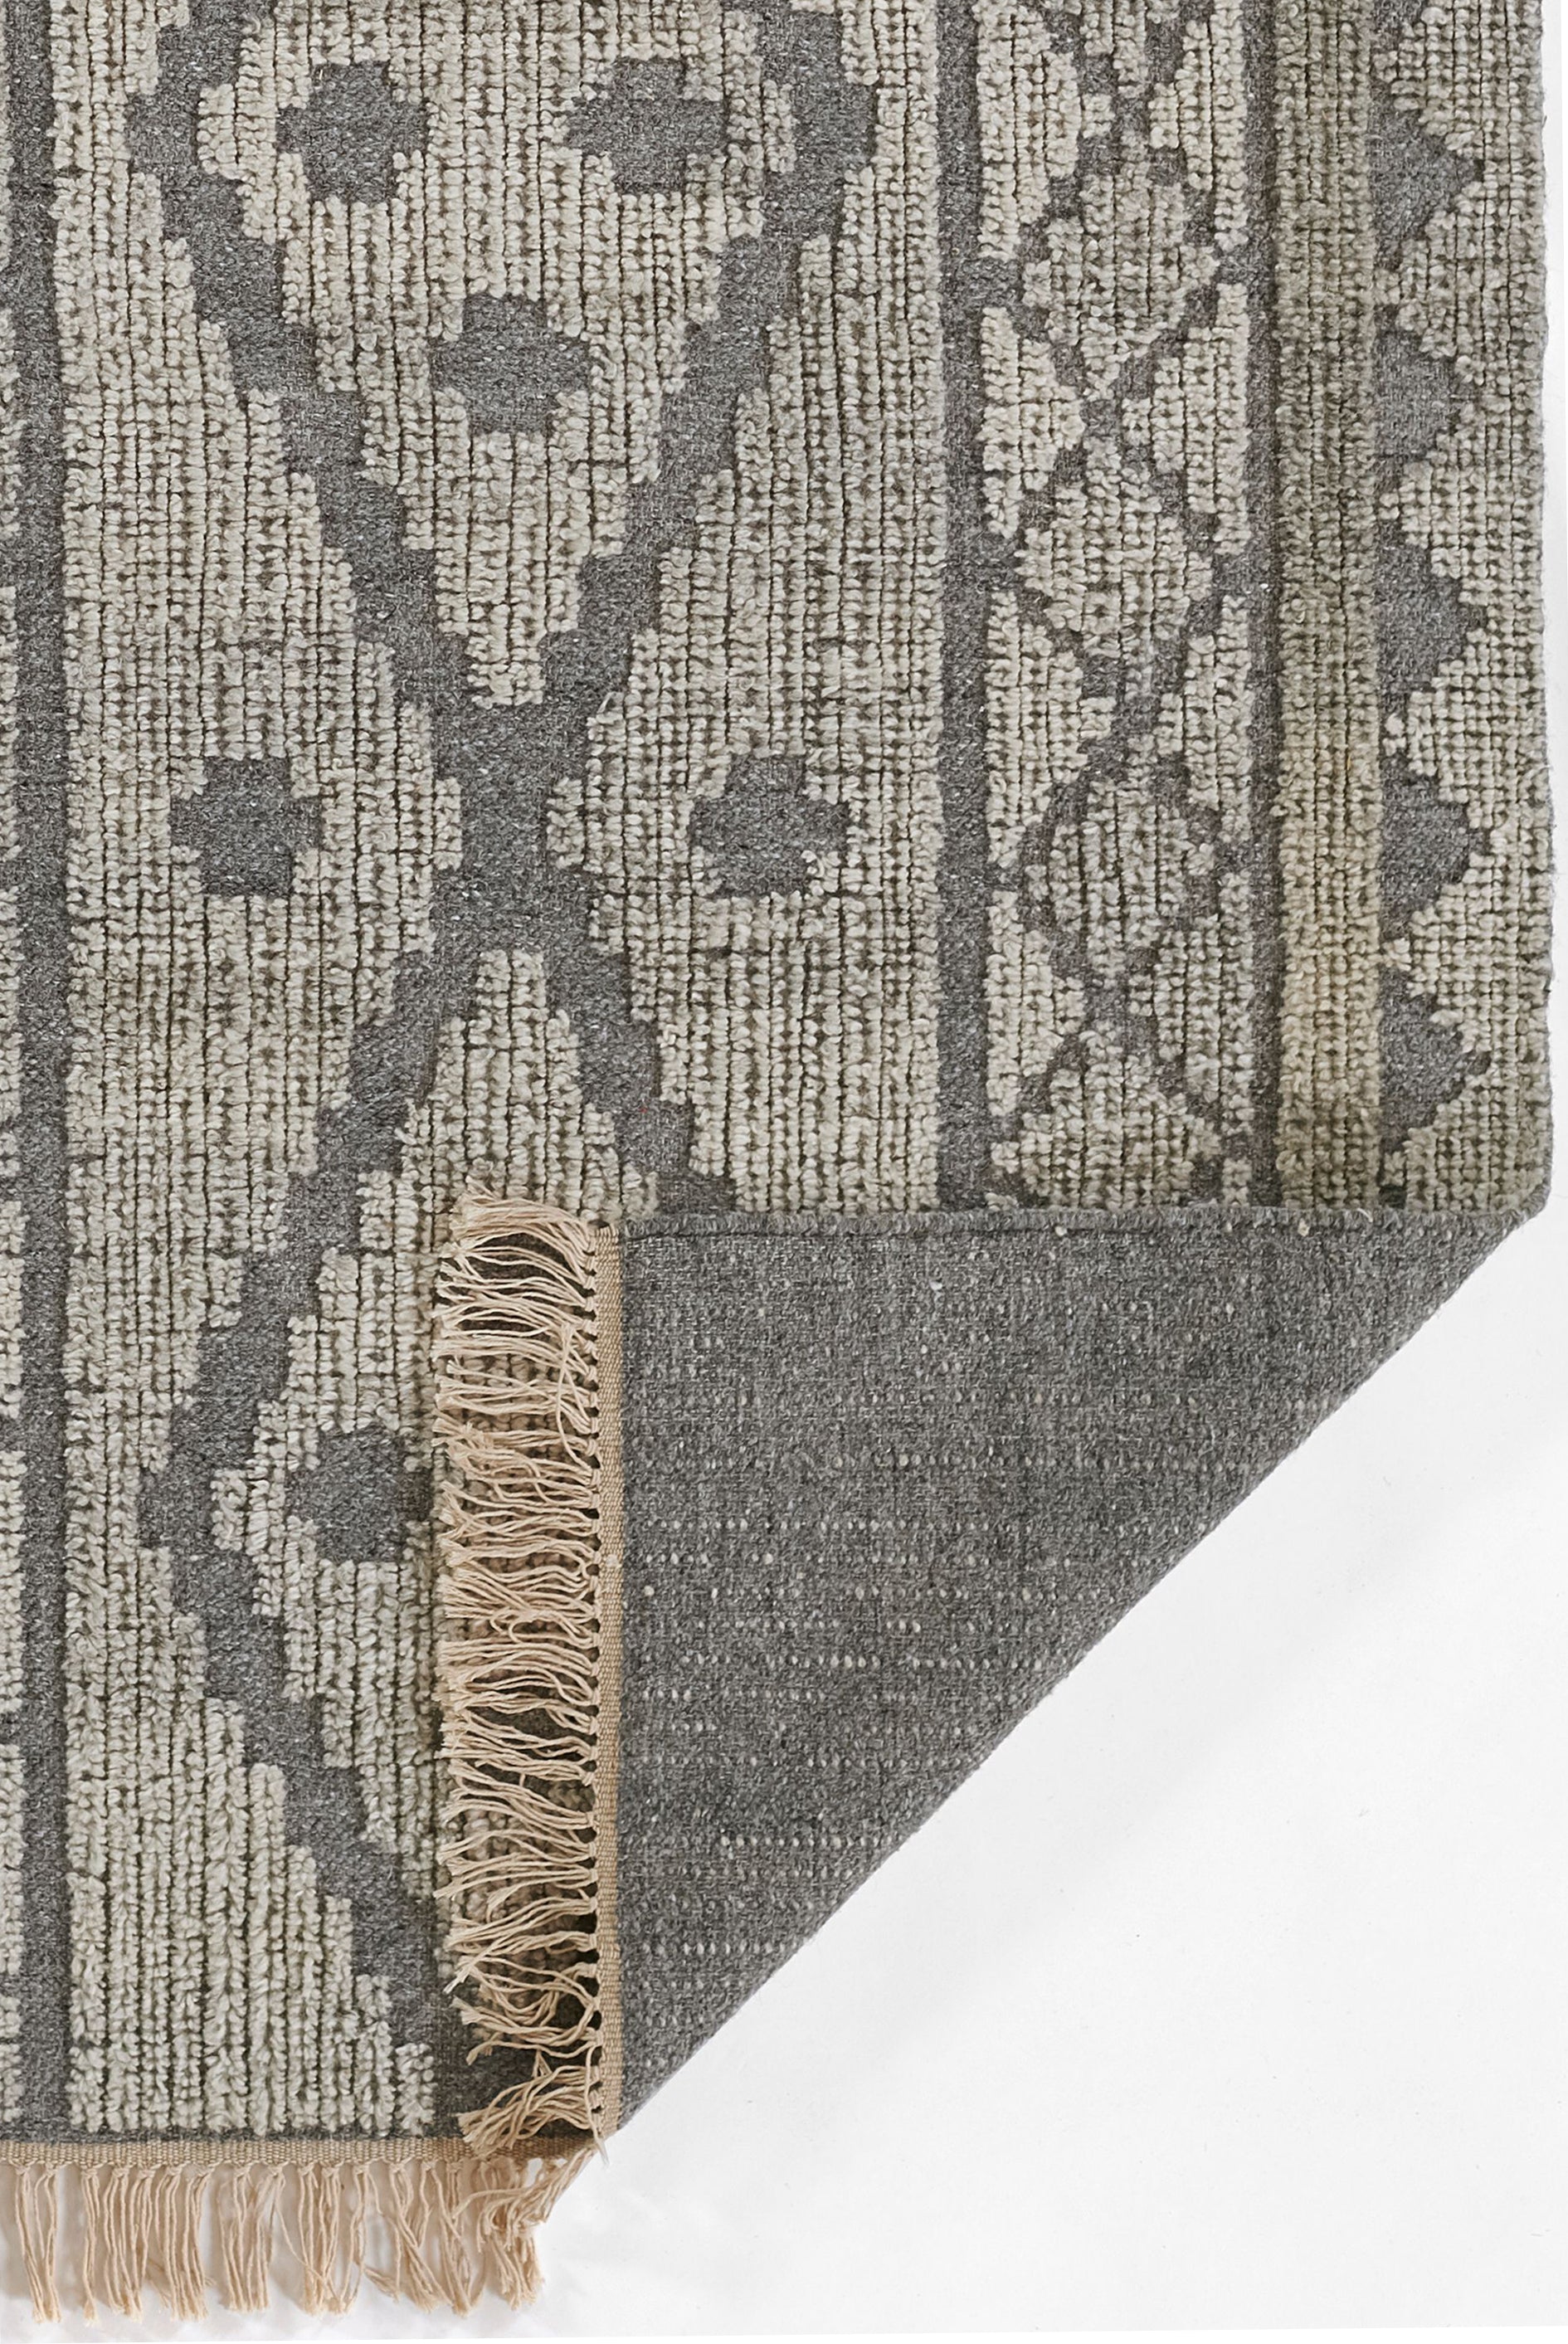 Southwest Hand Woven Wool & Cotton Gray Tone Area Rug